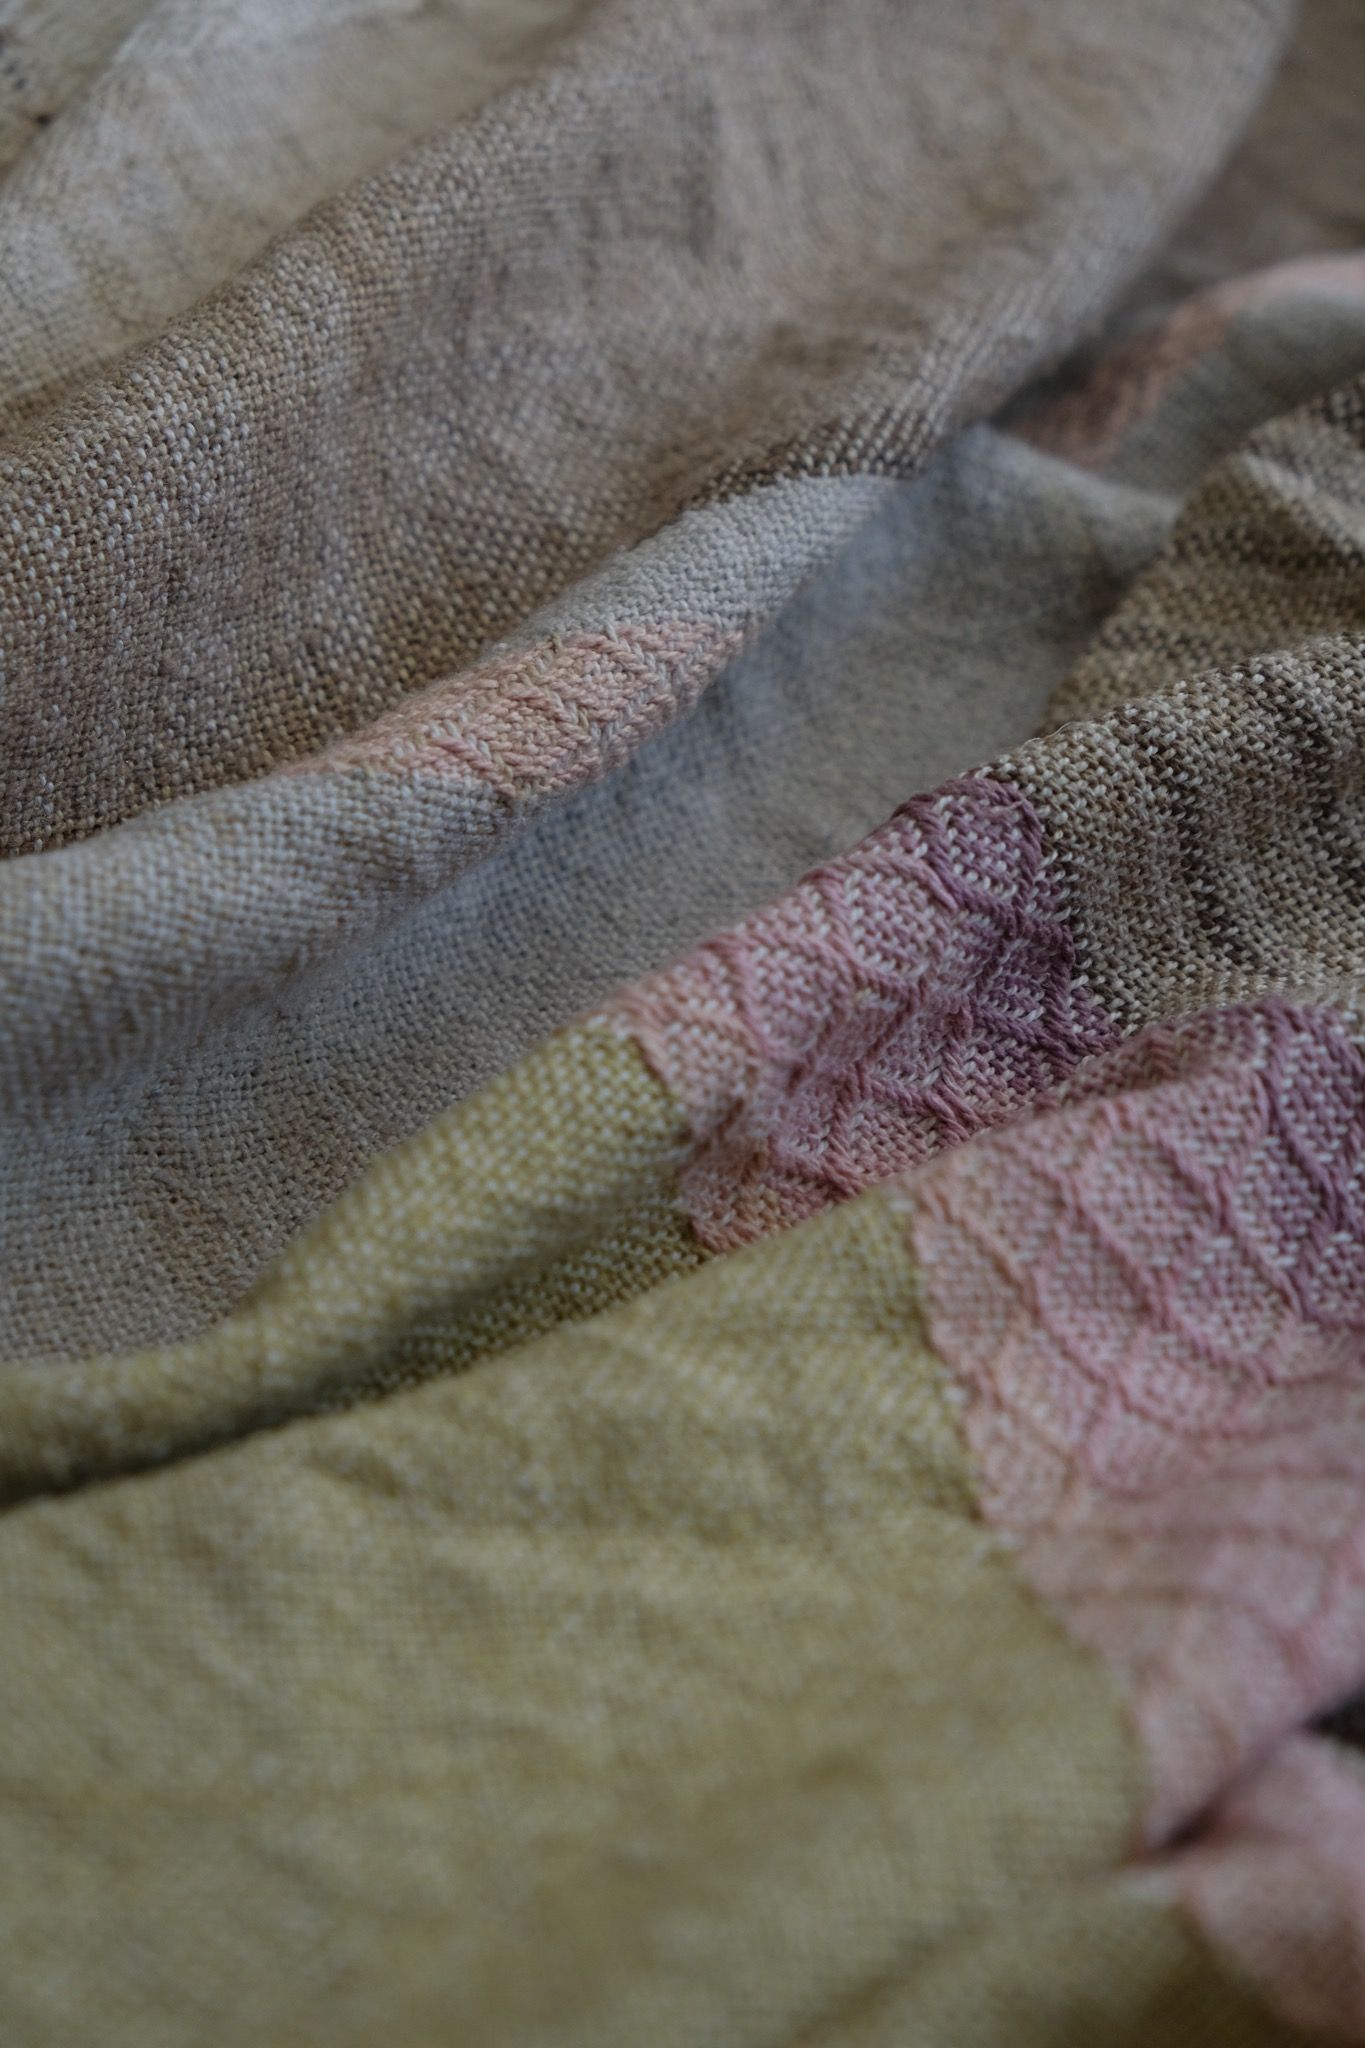 Detail of Handwoven fabric in a naturally dyed rainbow of grey, browns, greens, pinks, purples, yellow and orange lays on a wooden floor